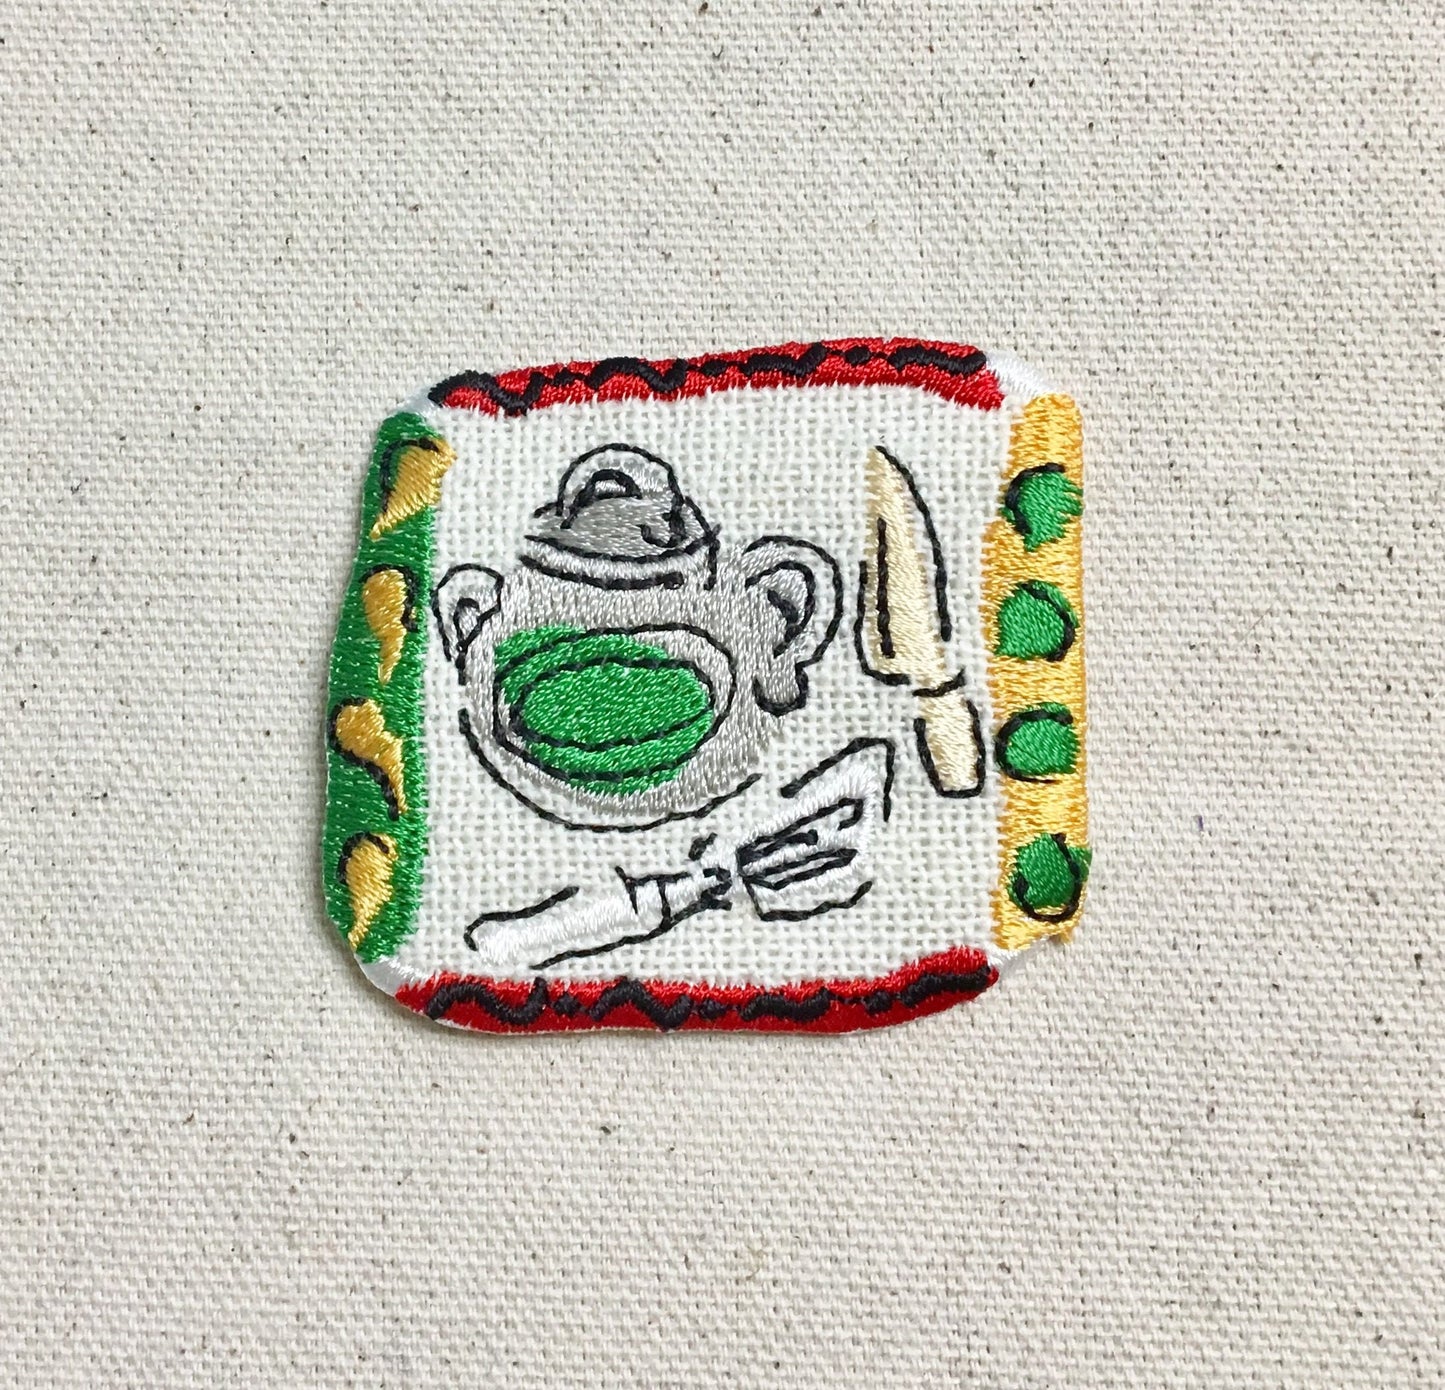 Teapot/Utensils - Kitchen Abstract In Frame - Vegetable Garden - Embroidered Iron on Patch